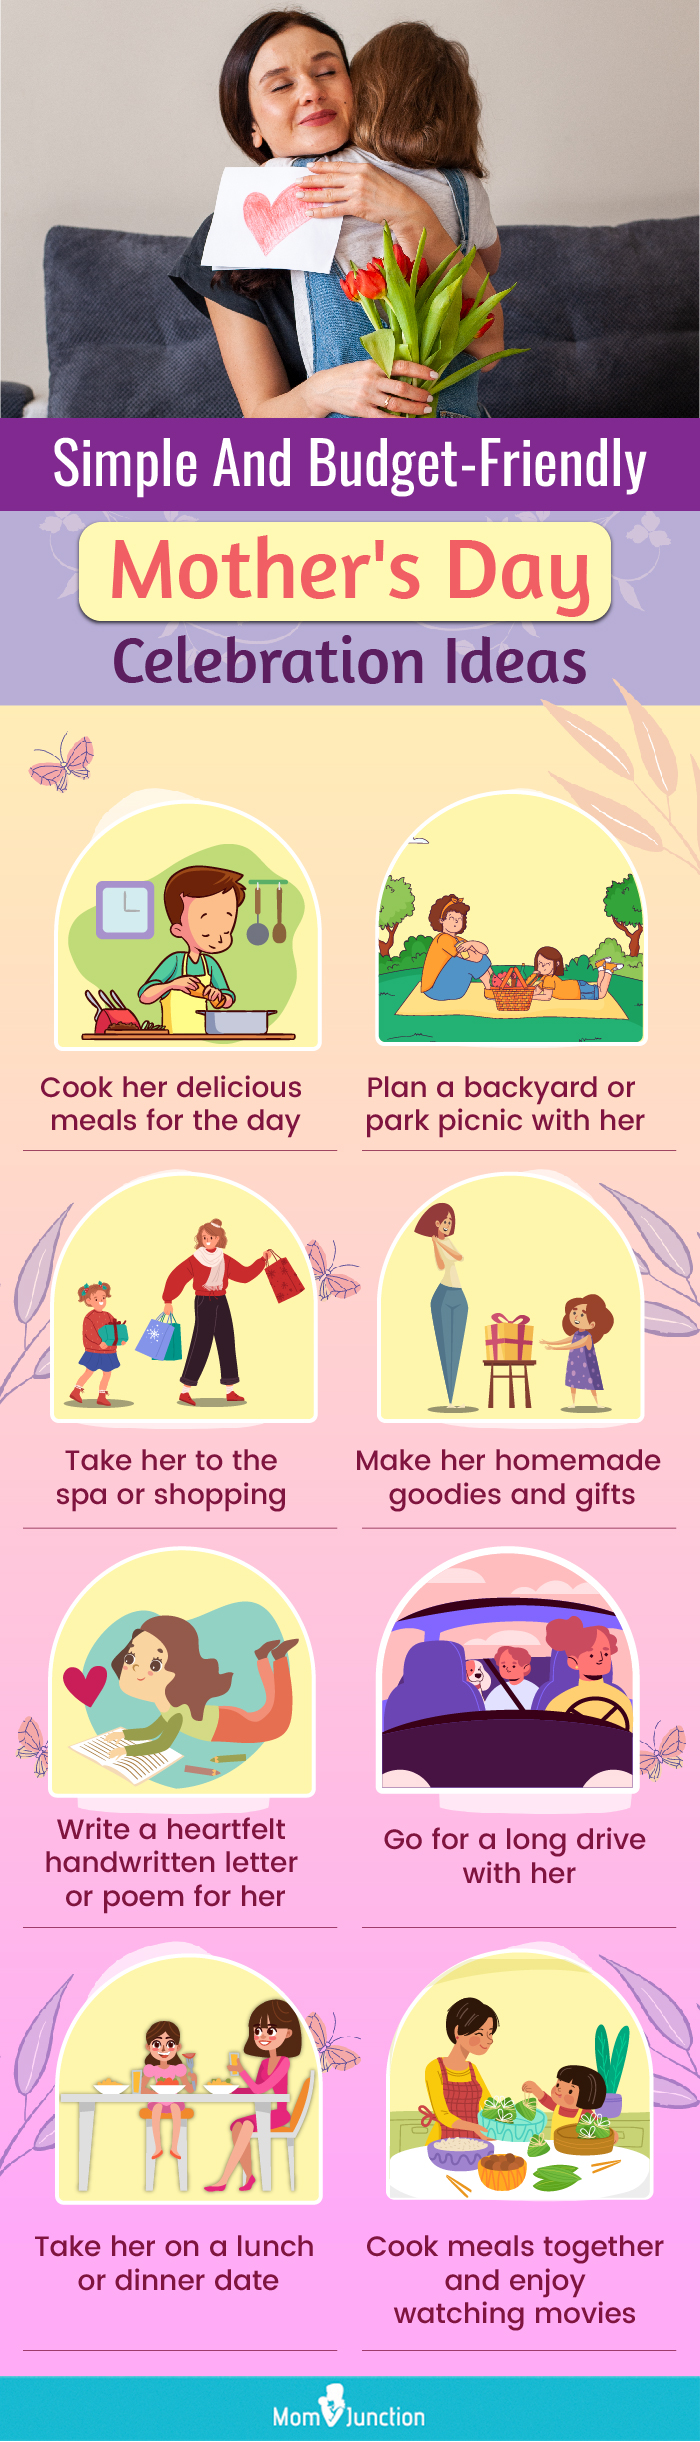 Simple And Budget-Friendly Mother's Day Celebration Ideas (infographic)